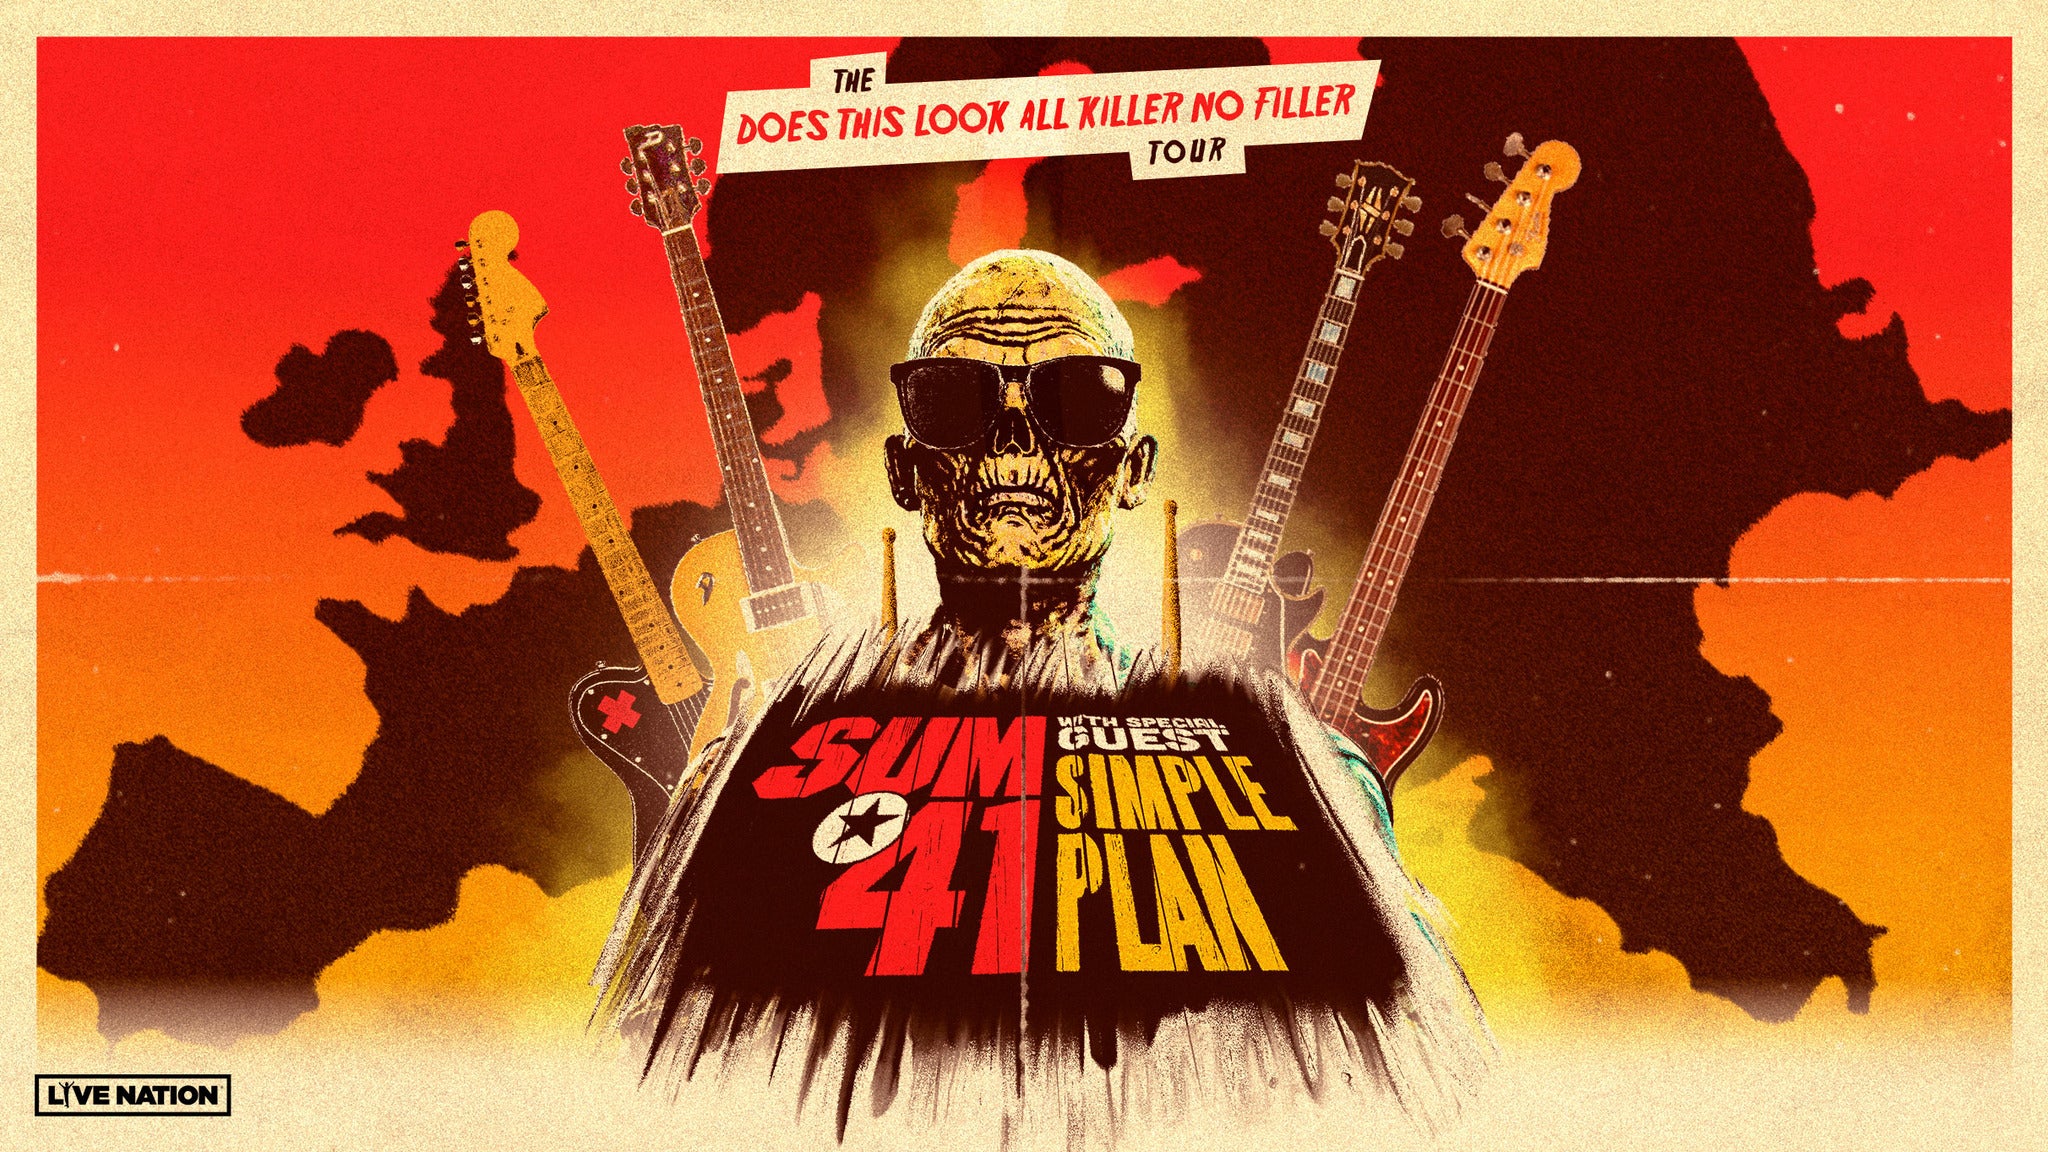 Sum 41 & Simple Plan|The Does This Look All Killer No Filler Tour |VIP